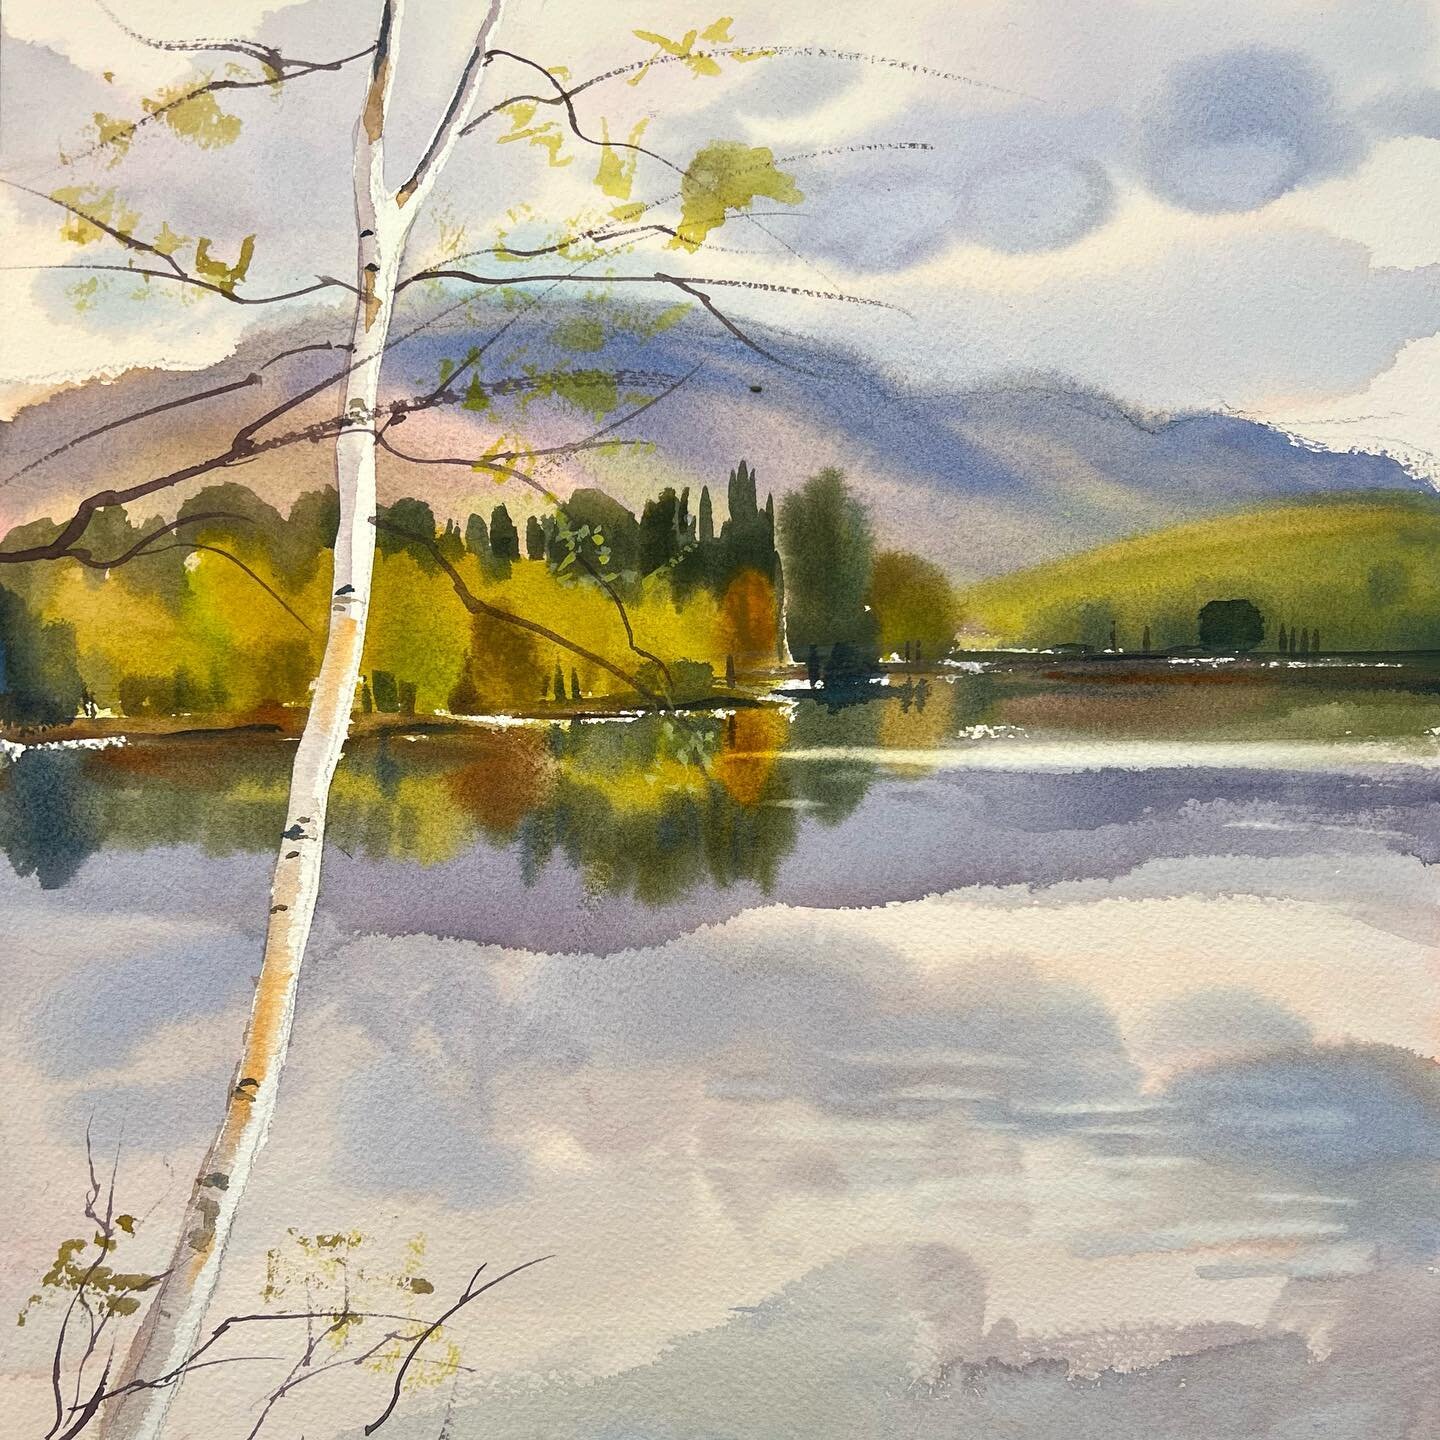 Birch Trees this week at Cooper Lake. Watercolor by Betsy Jacaruso.
Don&rsquo;t forget about our new evening classes Tuesdays 5:30-8:30pm